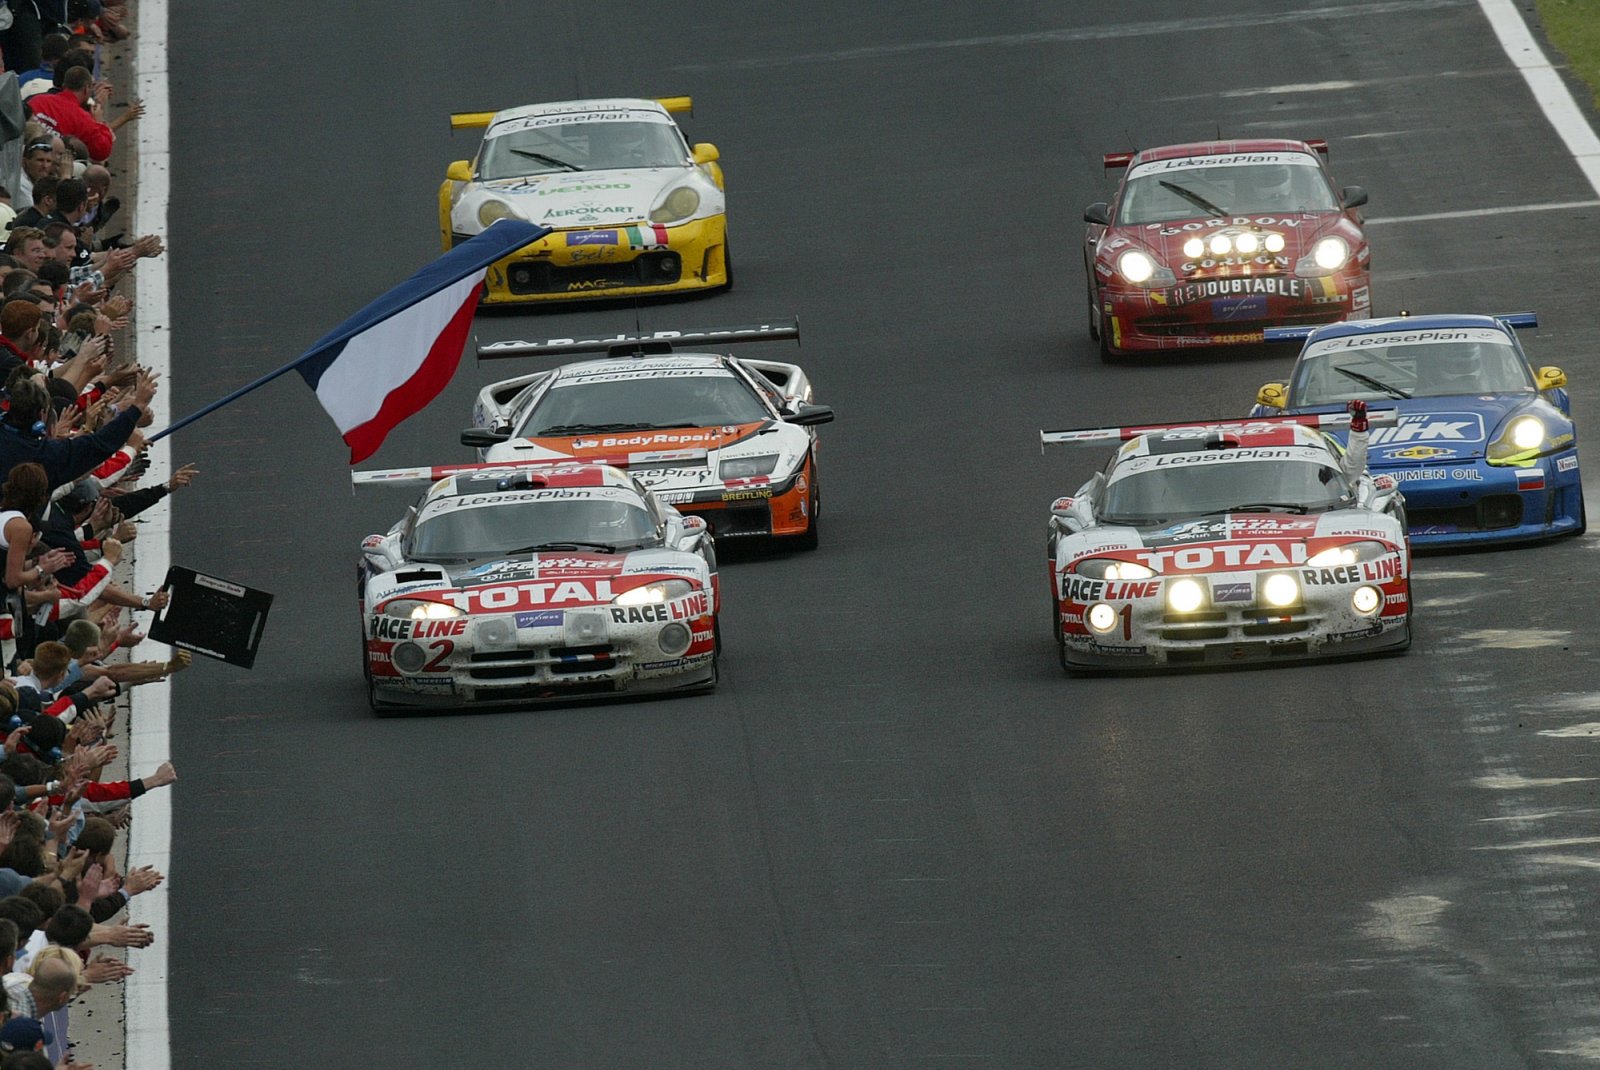 Incredible line-up of historic machinery confirmed for SRO 30th GT Anniversary by Peter Auto